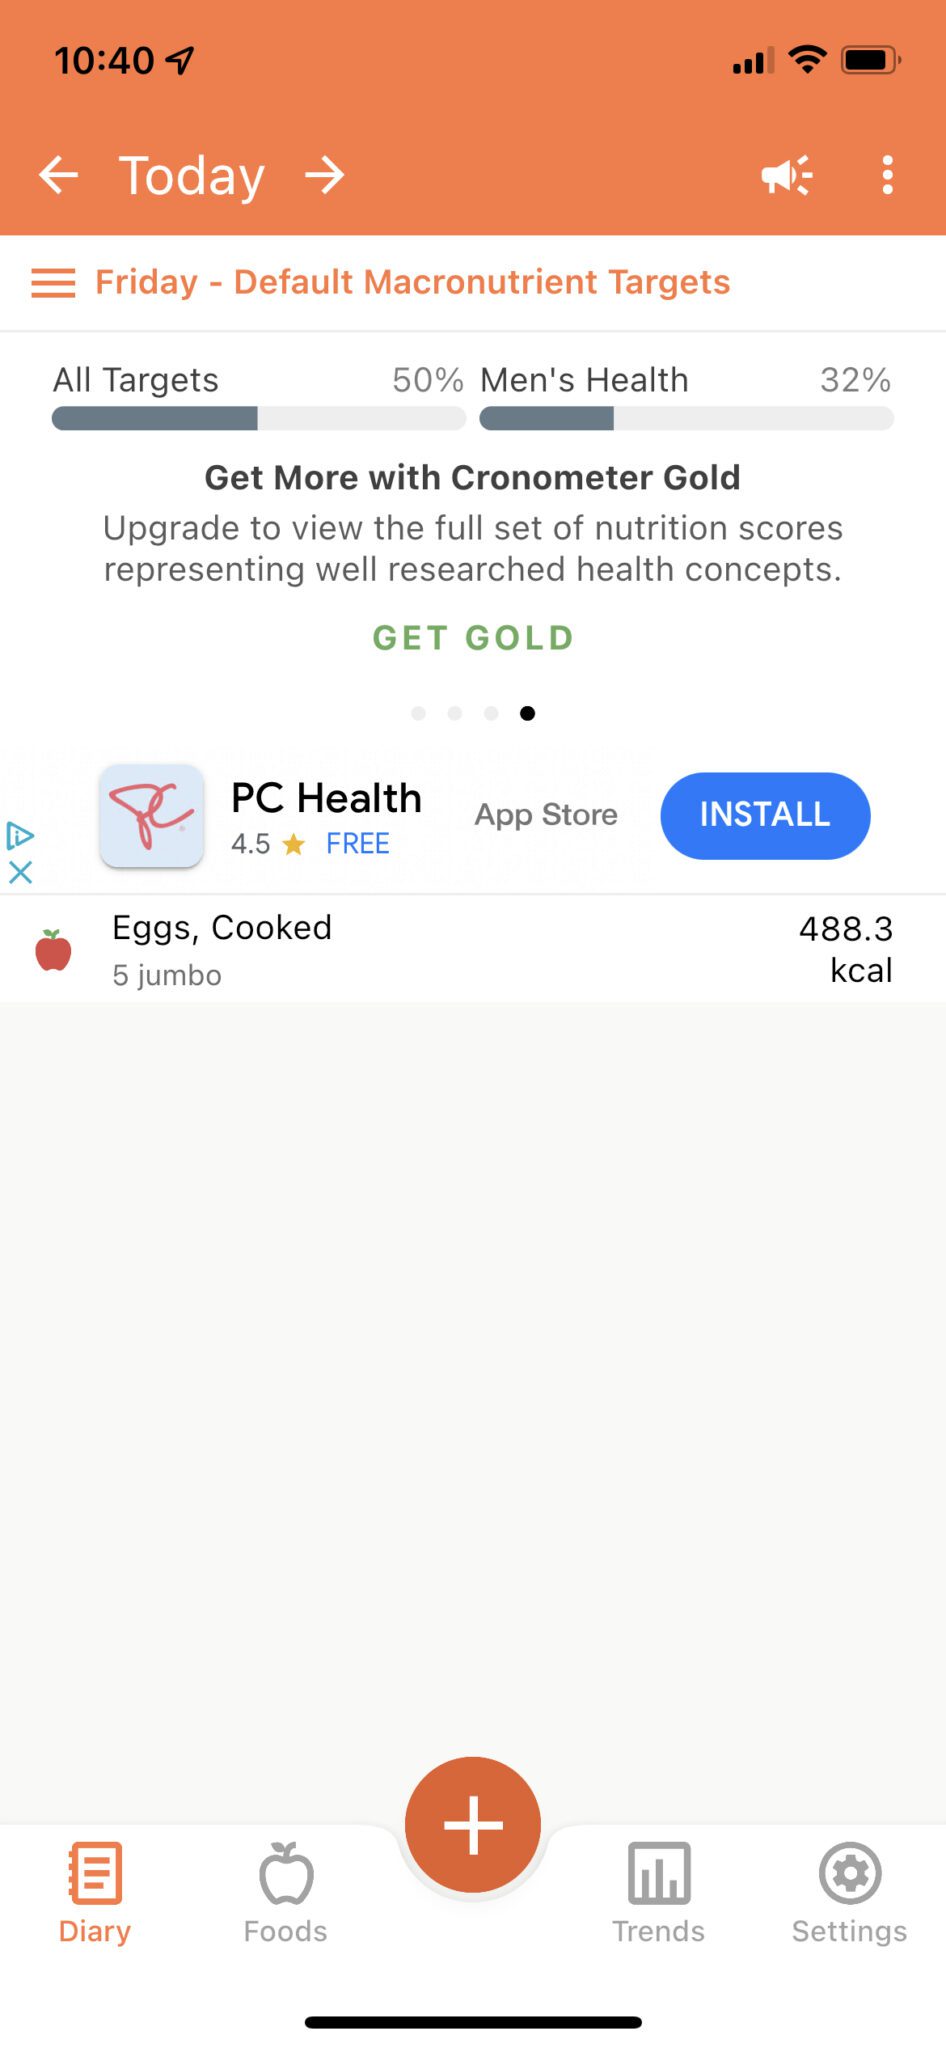 Swipe left on the diary header to see your Nutrition Scores.